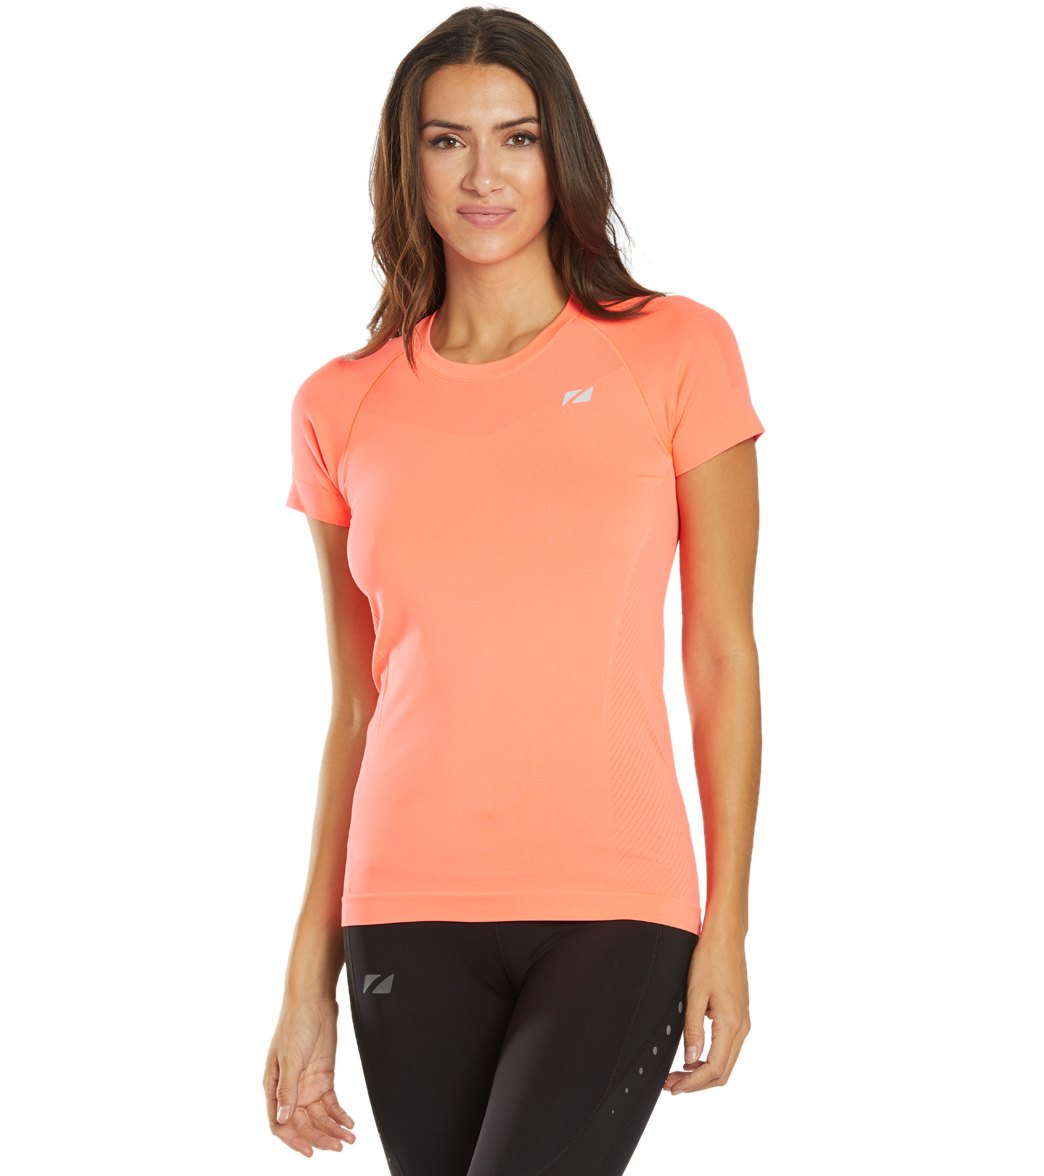 Zone3 Women's Seamless Compression Short Sleeve Top - Neon Coral Large Polyester - Swimoutlet.com